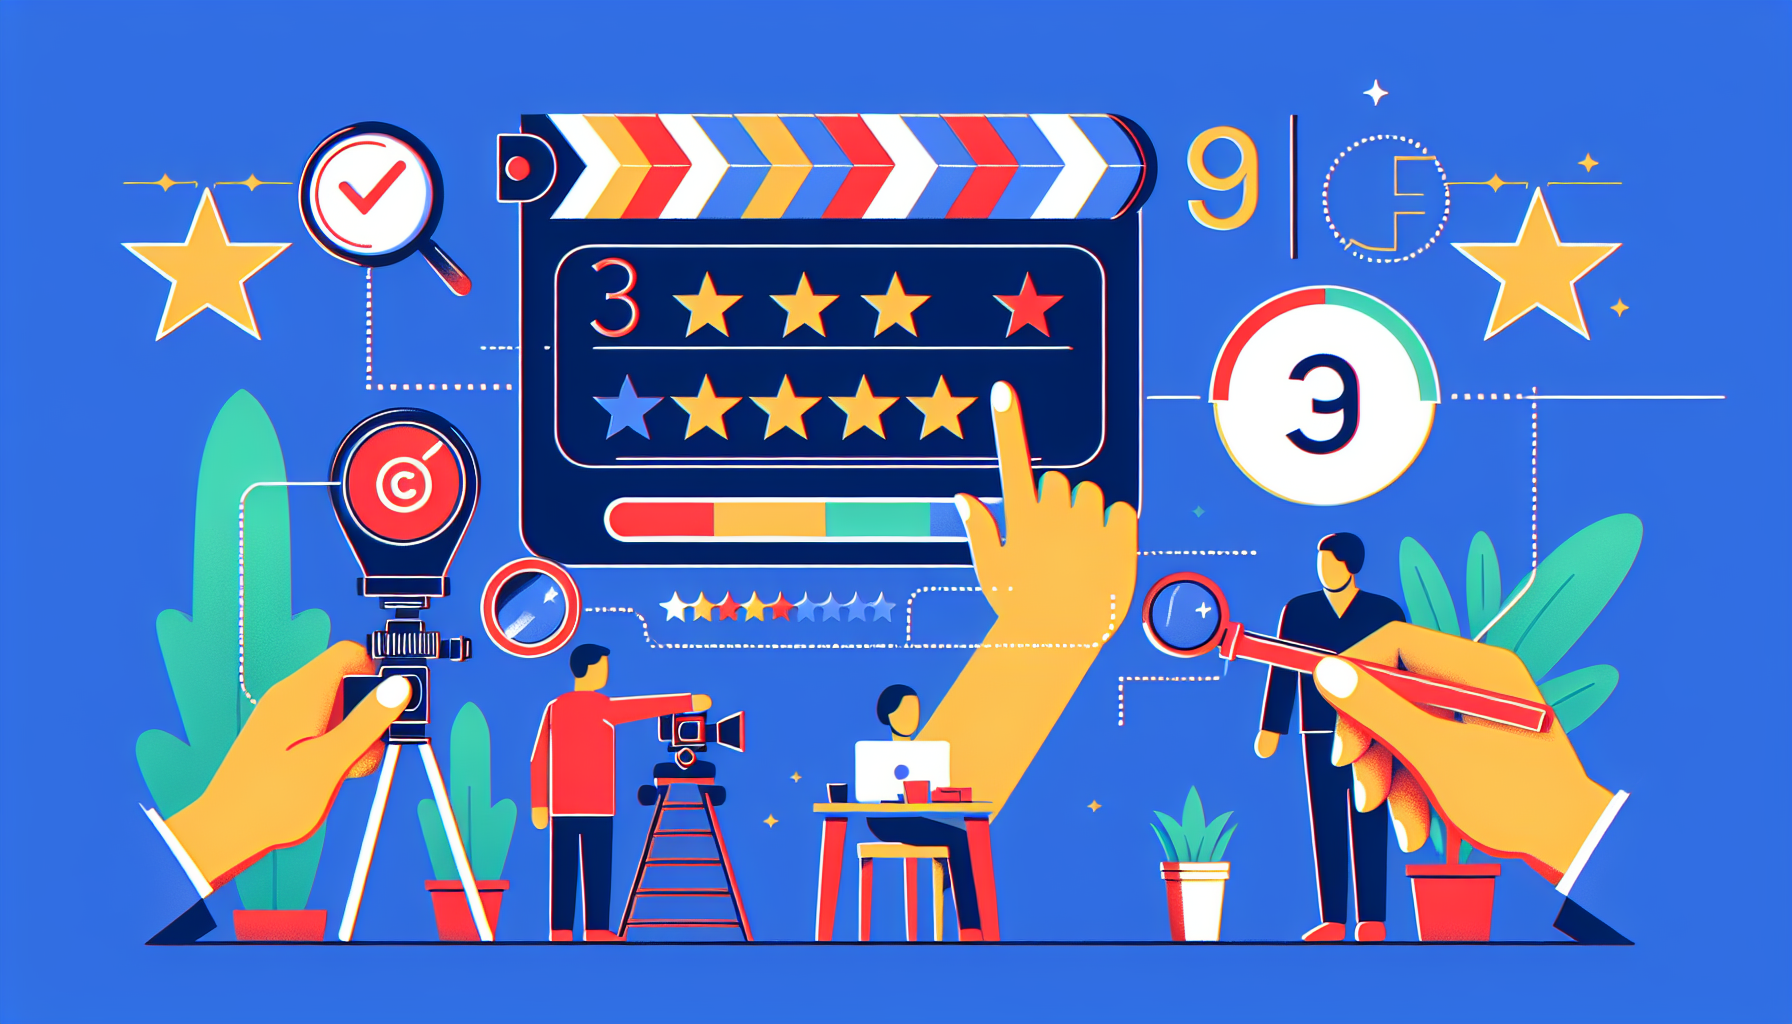 Create an image in modern, illustrative style, representing a step-by-step guide to creating a Google Review for a business. Use the cinematic 60-30-10 color toning rule, with 10% of the image using a strong primary color. The composition should maintain a 16:9 aspect ratio.